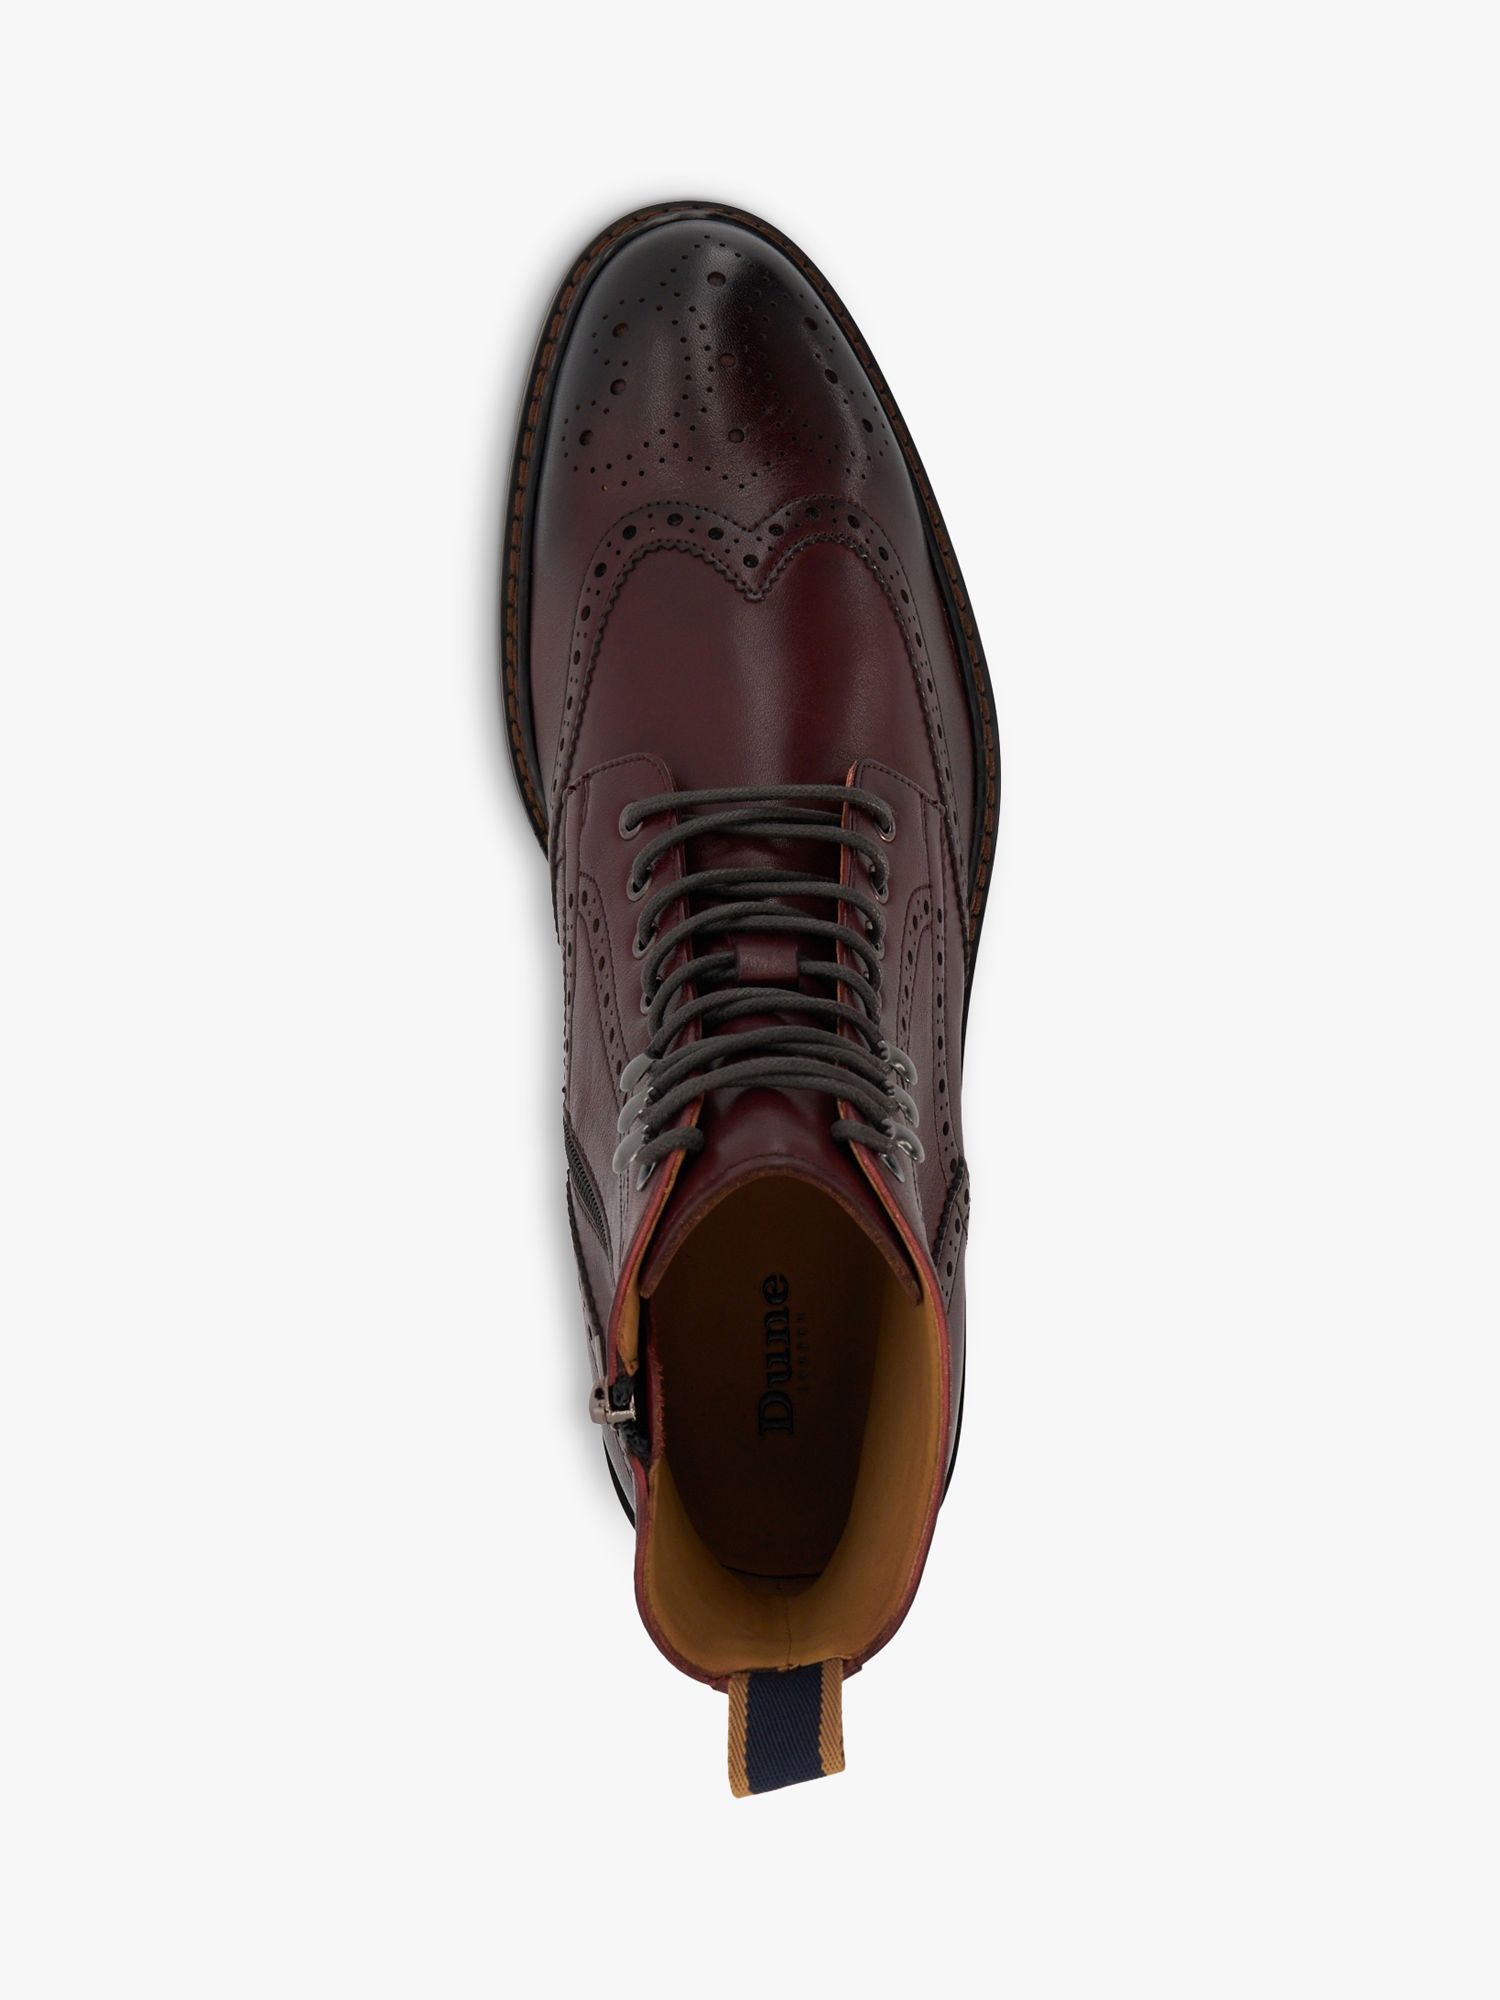 Buy Dune Colonies Eyelet Leather Brogue Boots, Bordeaux Online at johnlewis.com